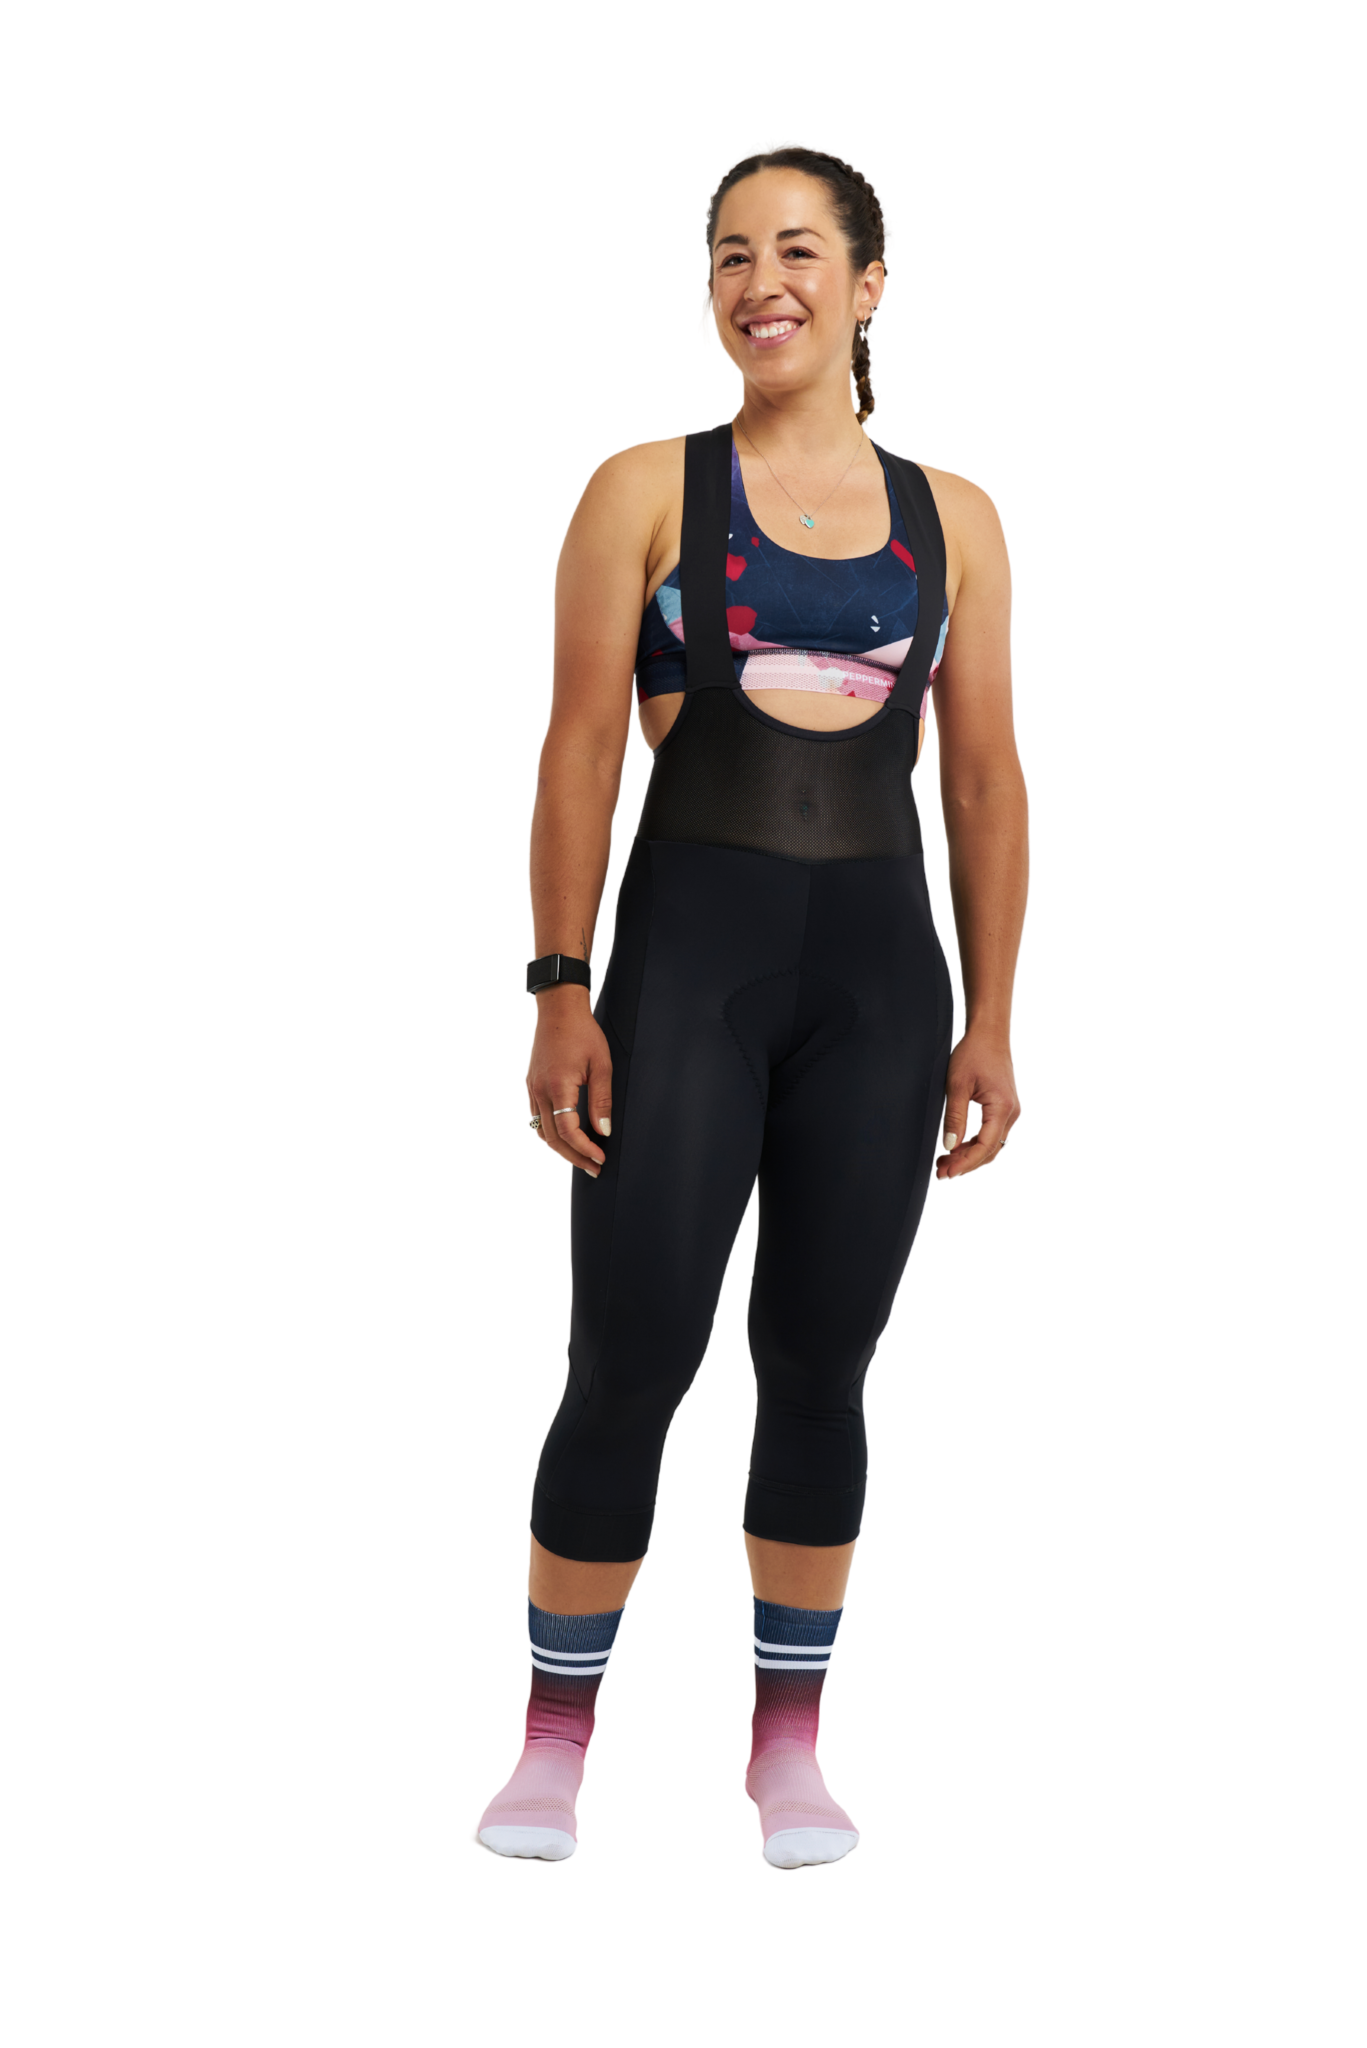 Peppermint Thermal Bib Tights Women's - Parry Sound Bikes